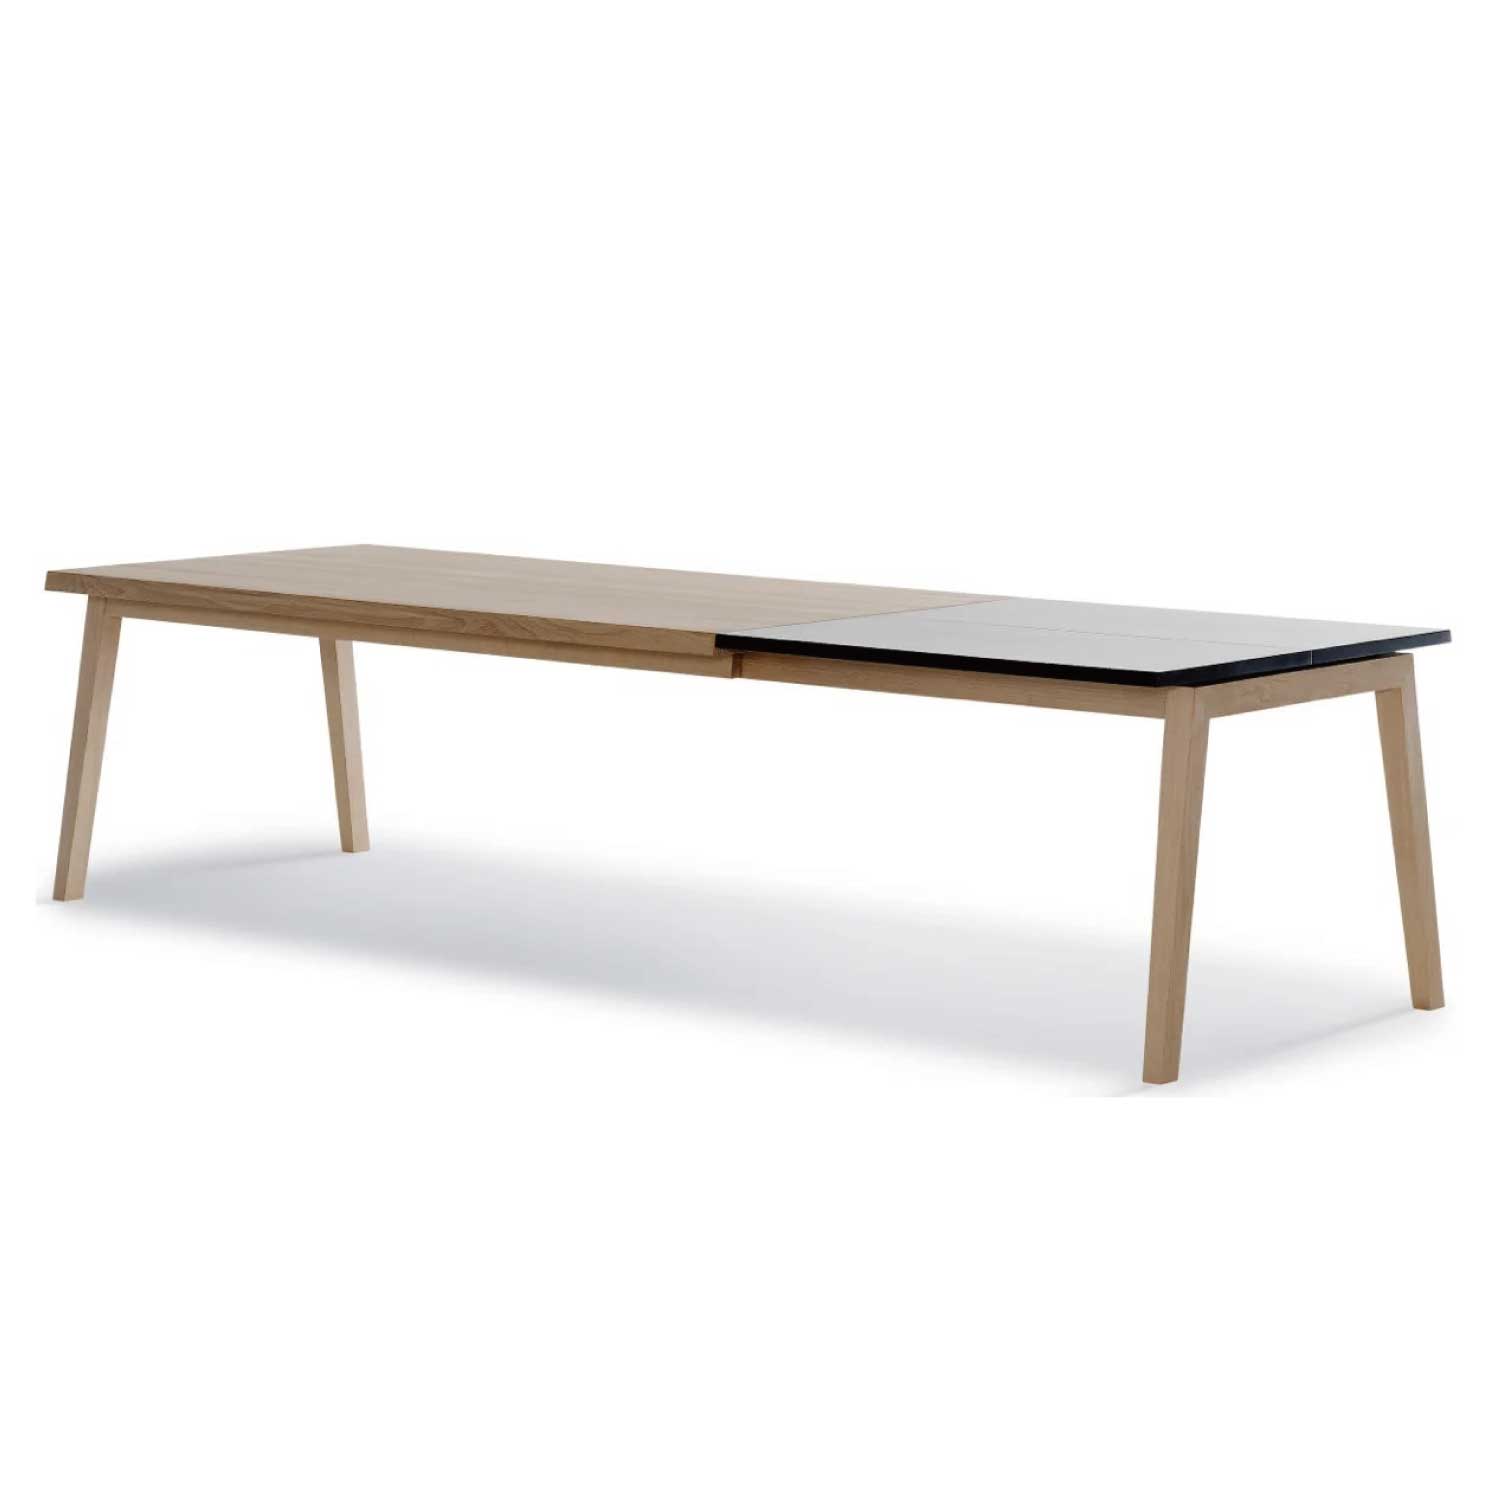 SH900 | EXTEND TABLE